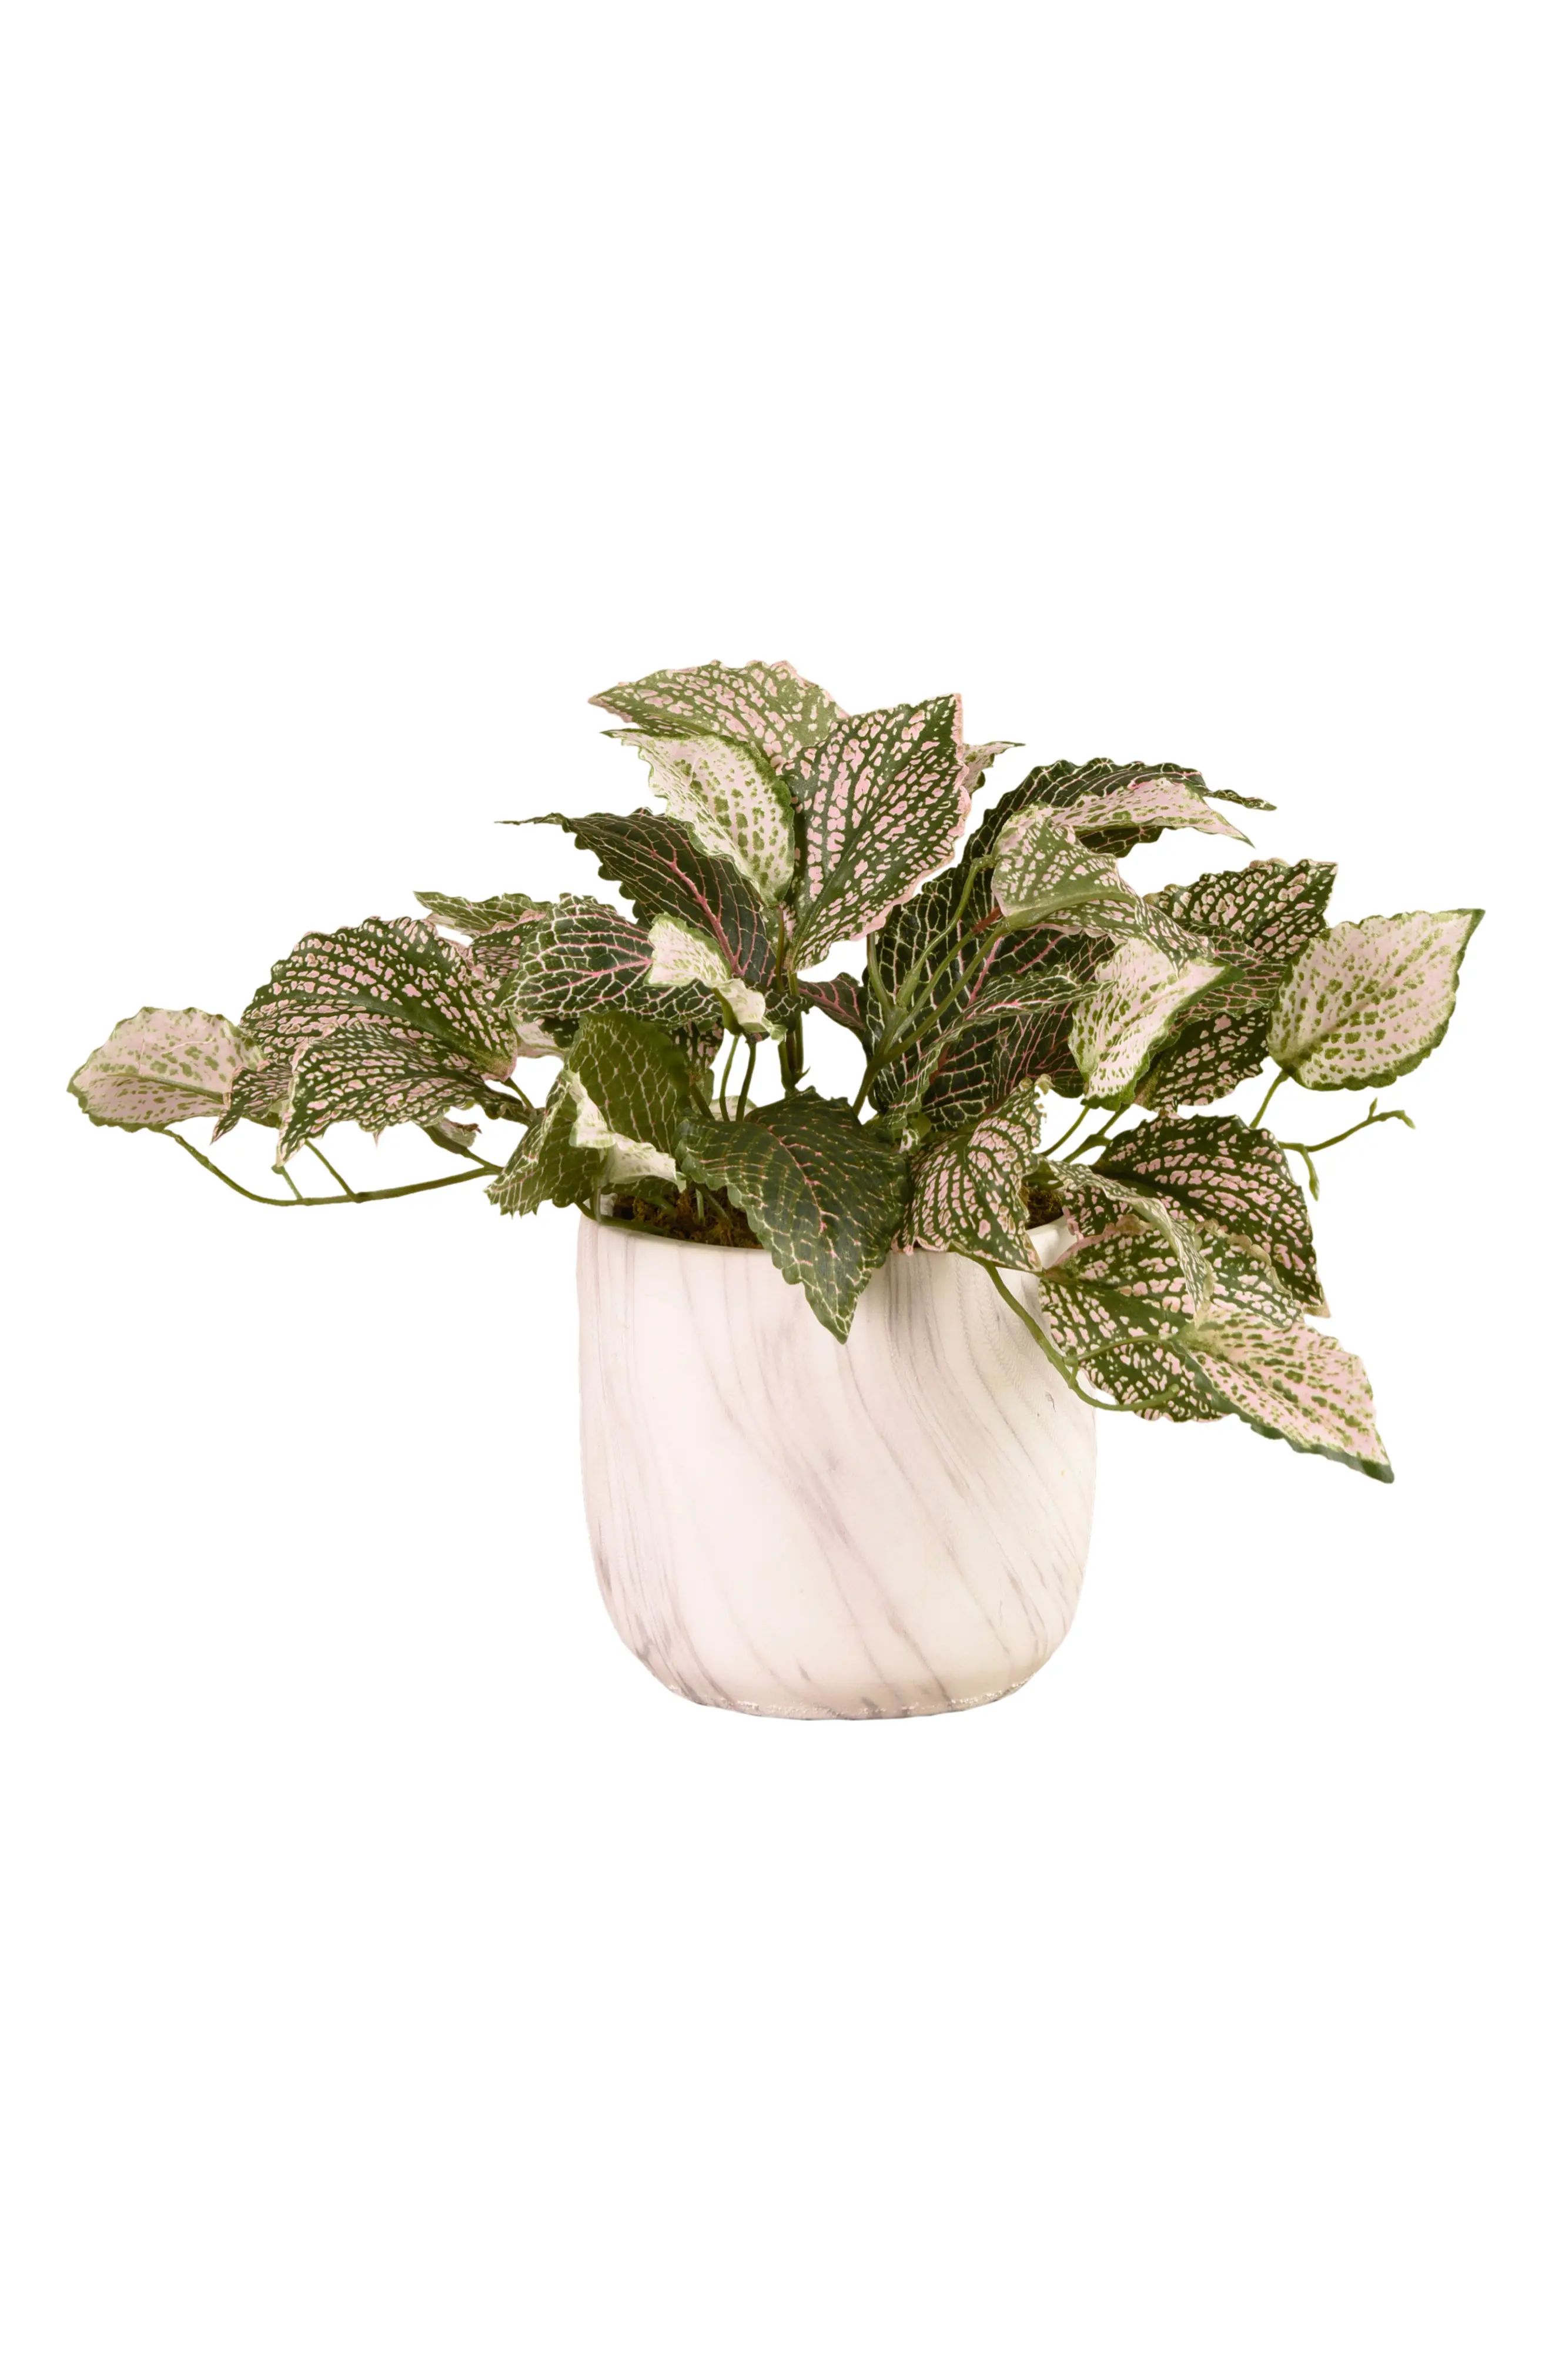 Bloomr Potted Fittonia Planter Decoration in Green/Green at Nordstrom, Size Small | Nordstrom